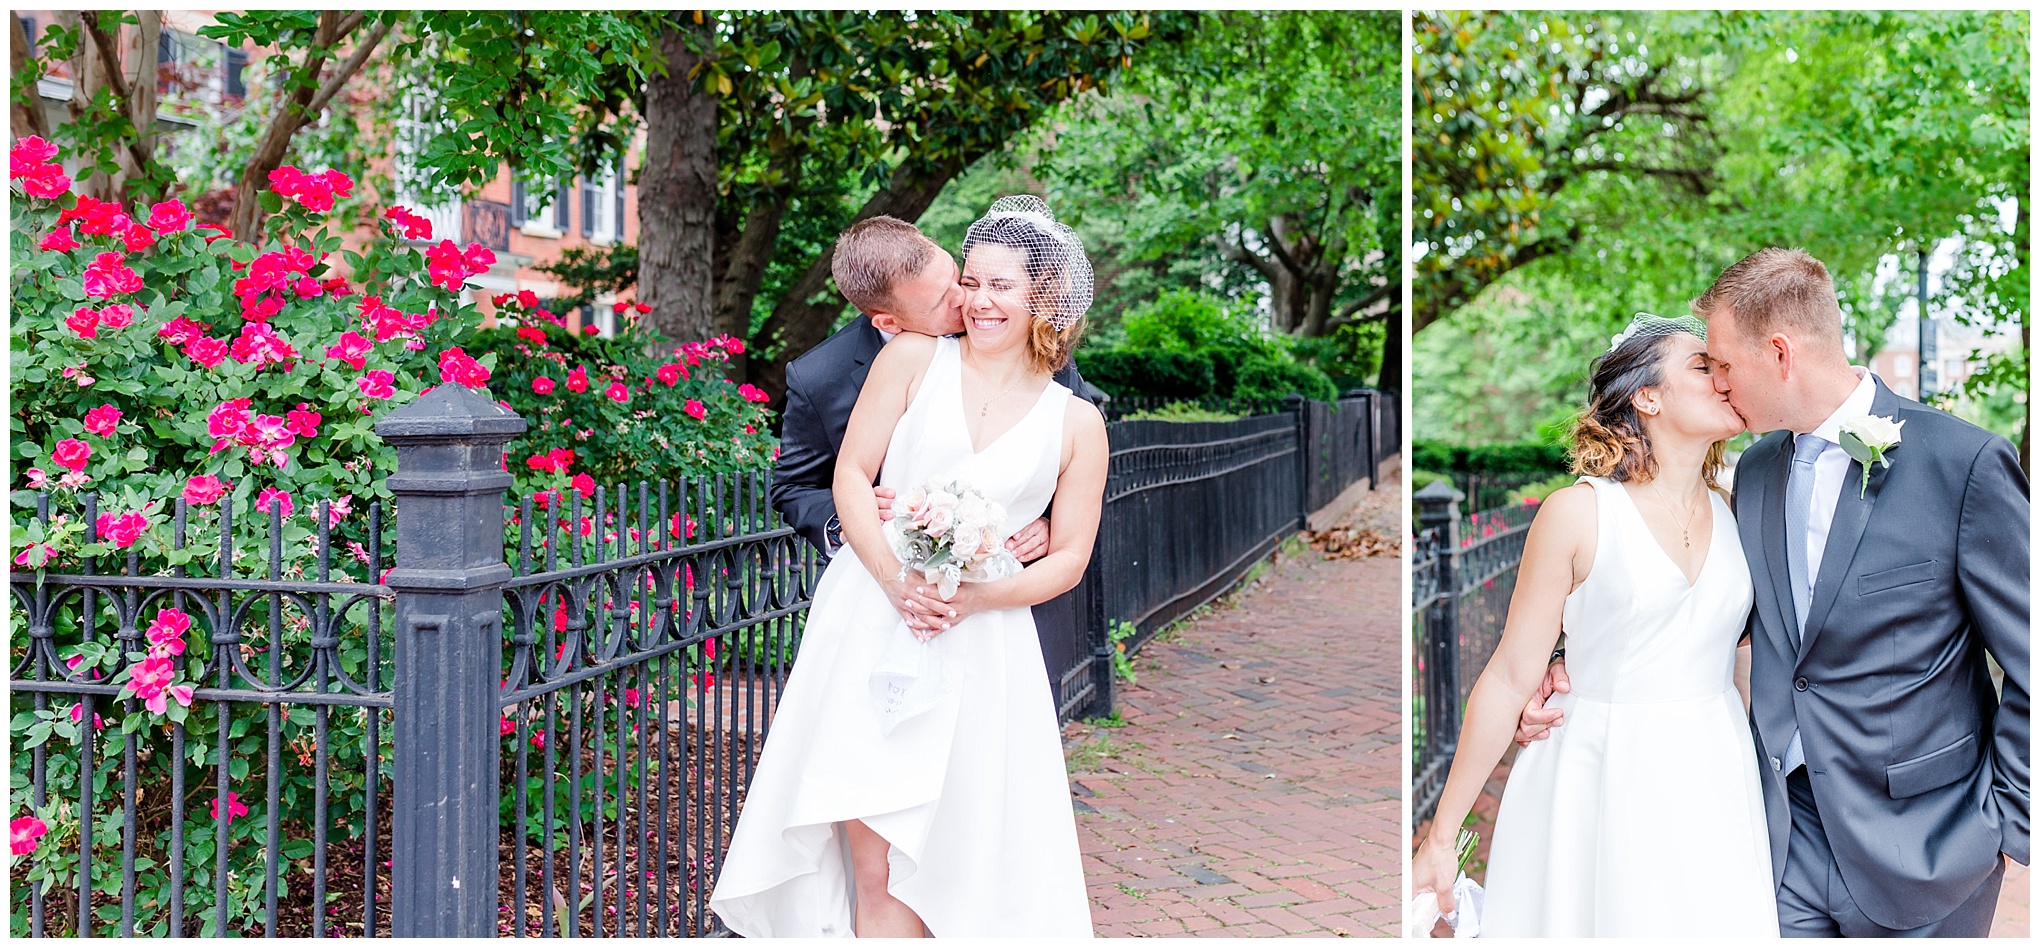 photography ready wedding venues, bride and groom, wedding portraits, portrait locations, old town Alexandria, northern VA wedding venues, Morrison House, Morrison House wedding, kissing pic, a-line wedding gown